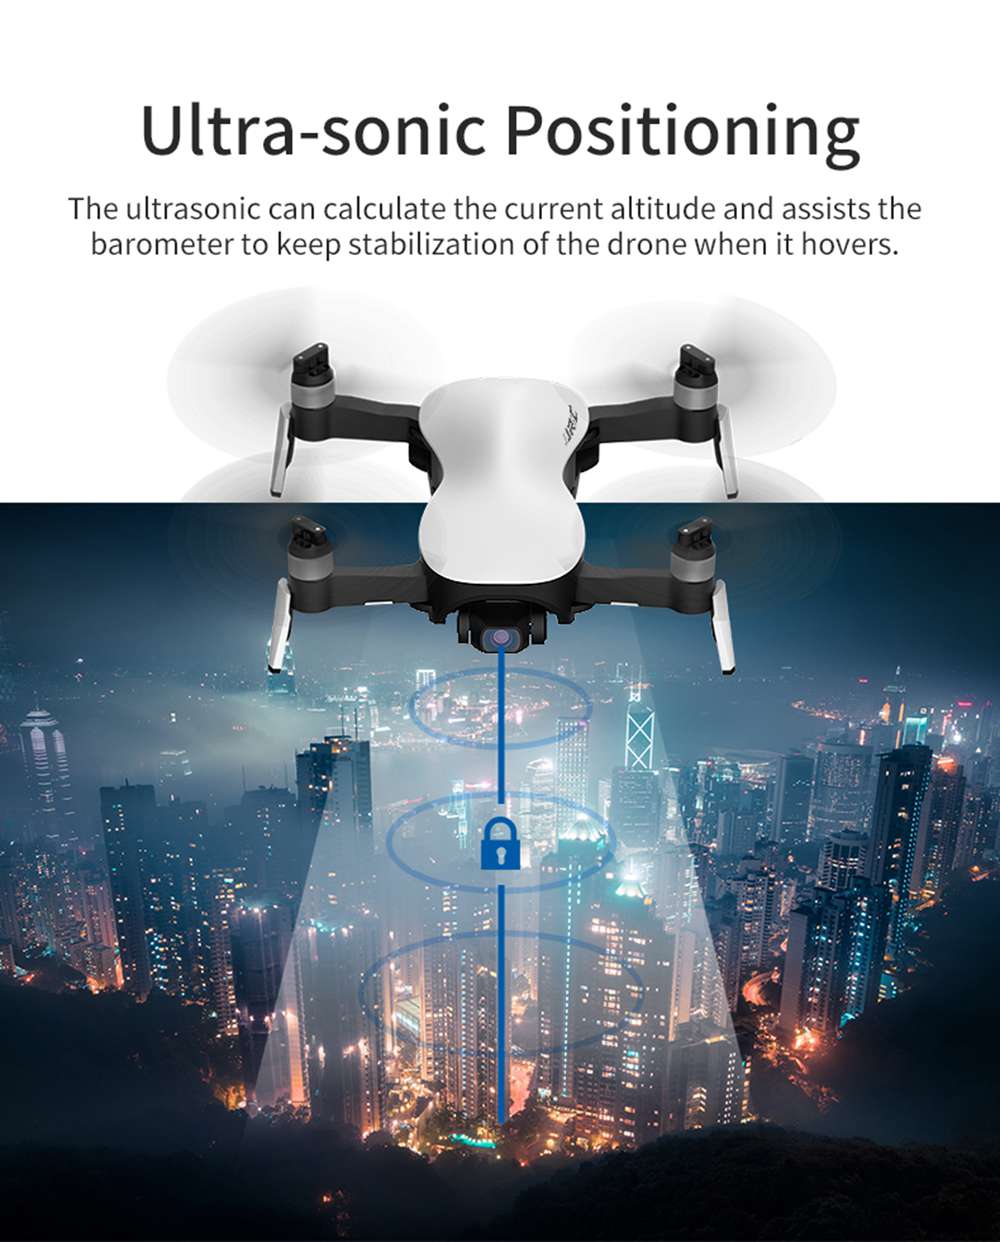 JJRC X12 AURORA 4K 5G WIFI 1.2km FPV GPS Foldable RC Drone With 3Axis Gimbal 50X Digital Zoom Ultrasonic Positioning RTF - White One Battery